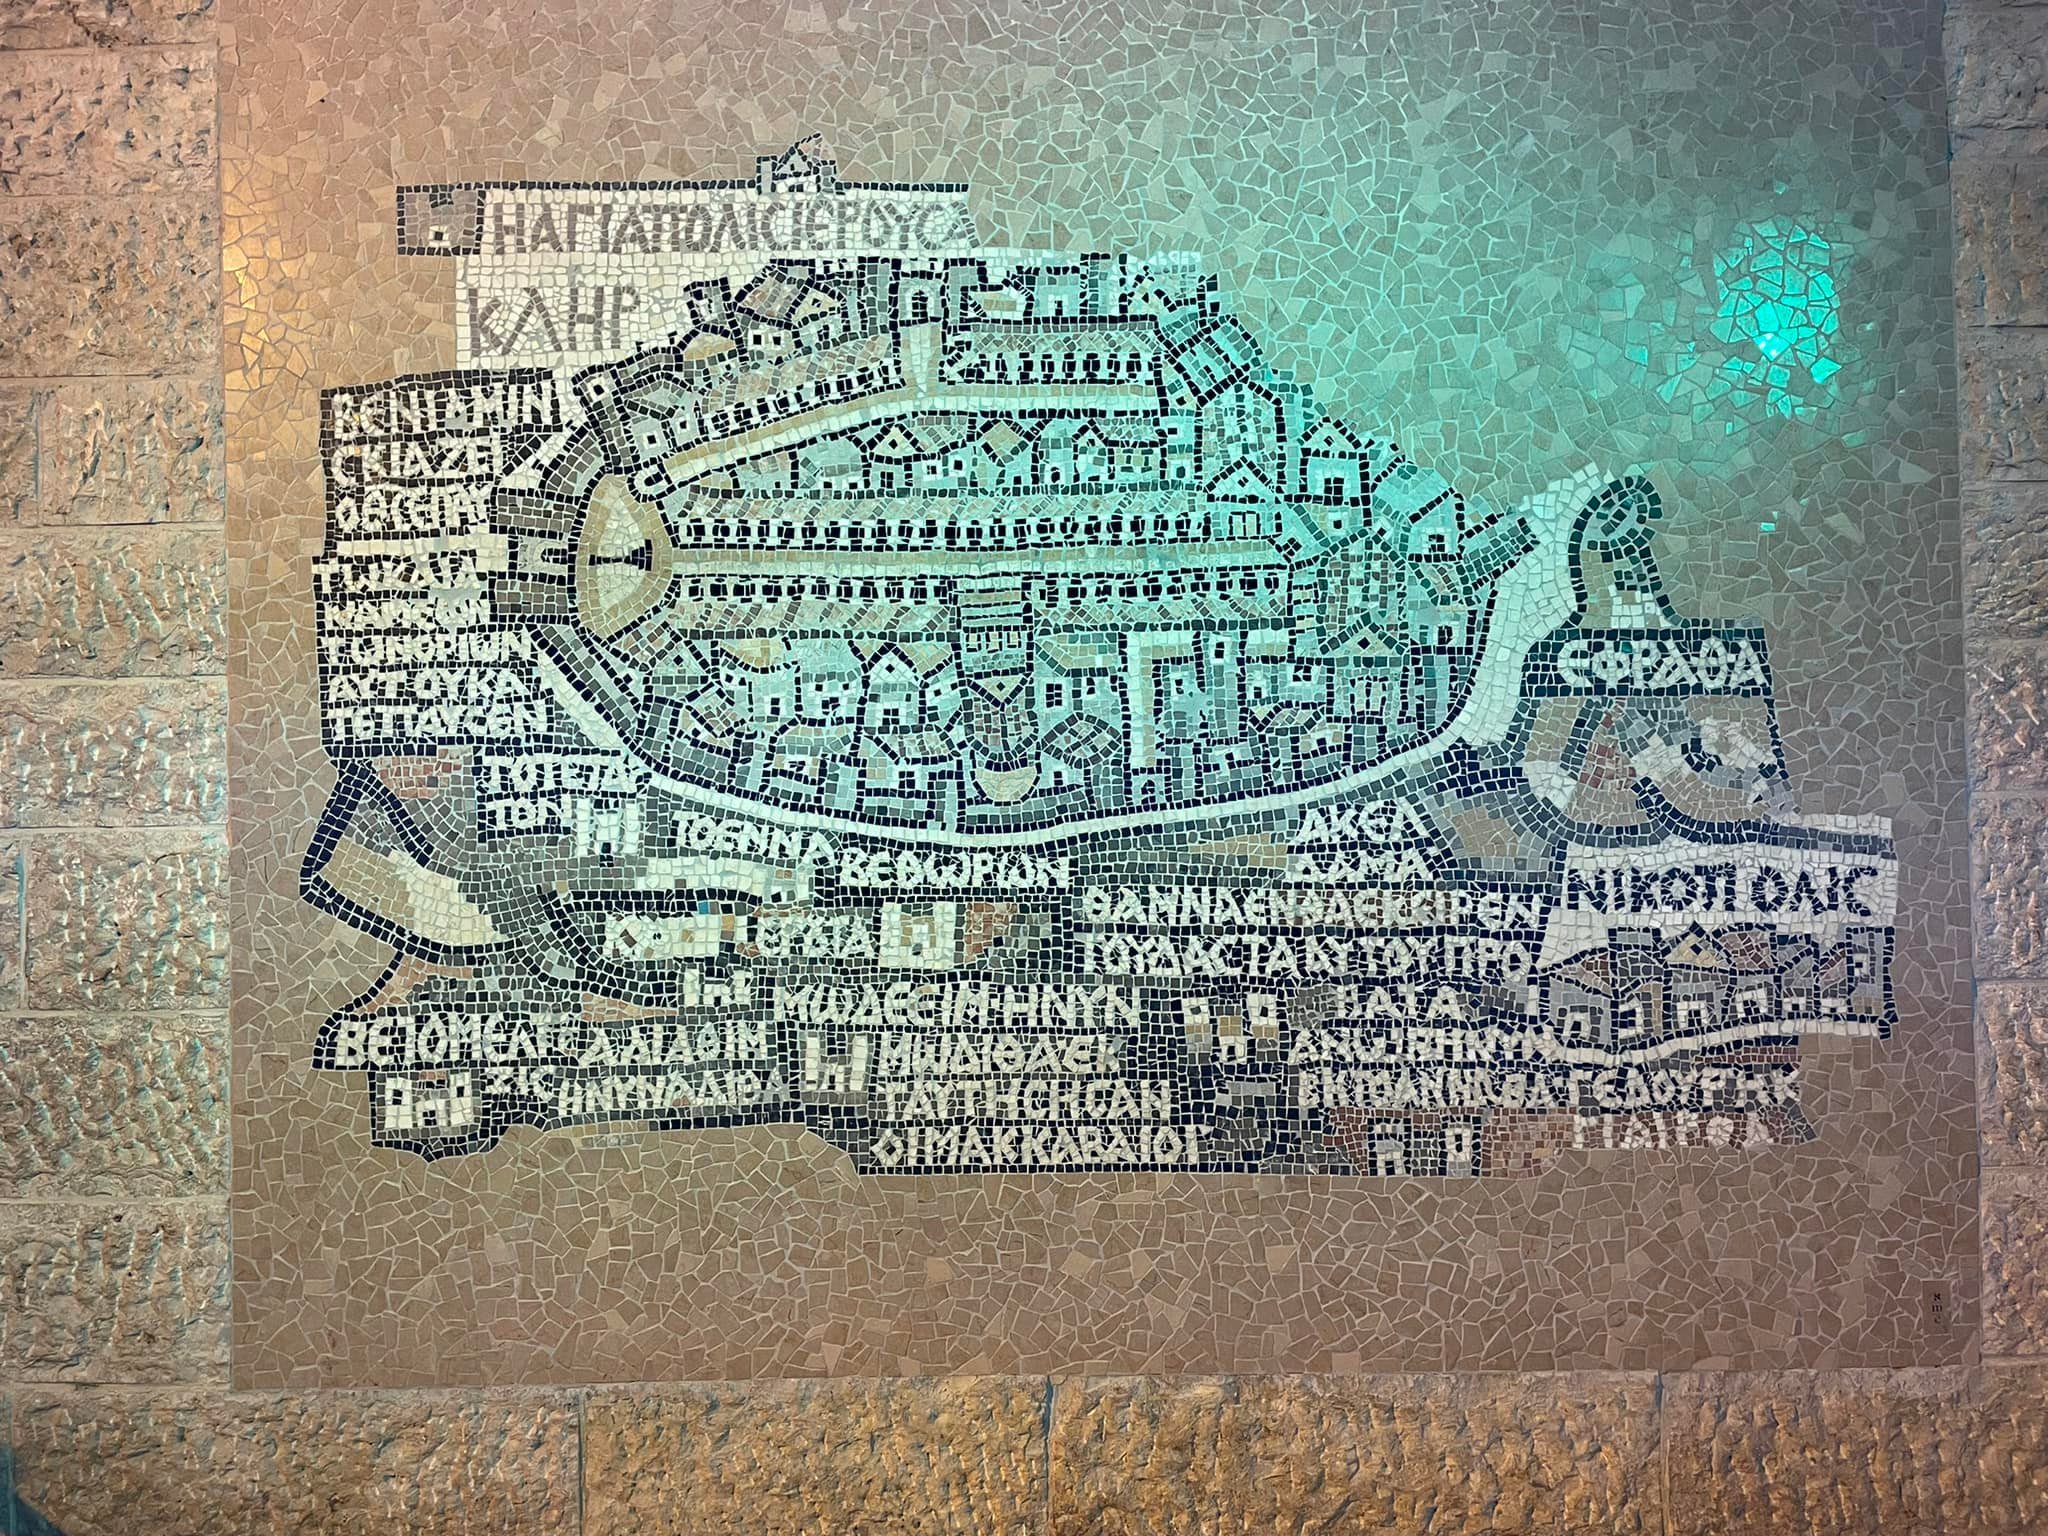  This is a rendition of the oldest map ever discovered of Jerusalem. It was found in a Byzantine monastery in Jordan, and is over 1600 years old. So the archaeologist knew exactly where to find the road. 